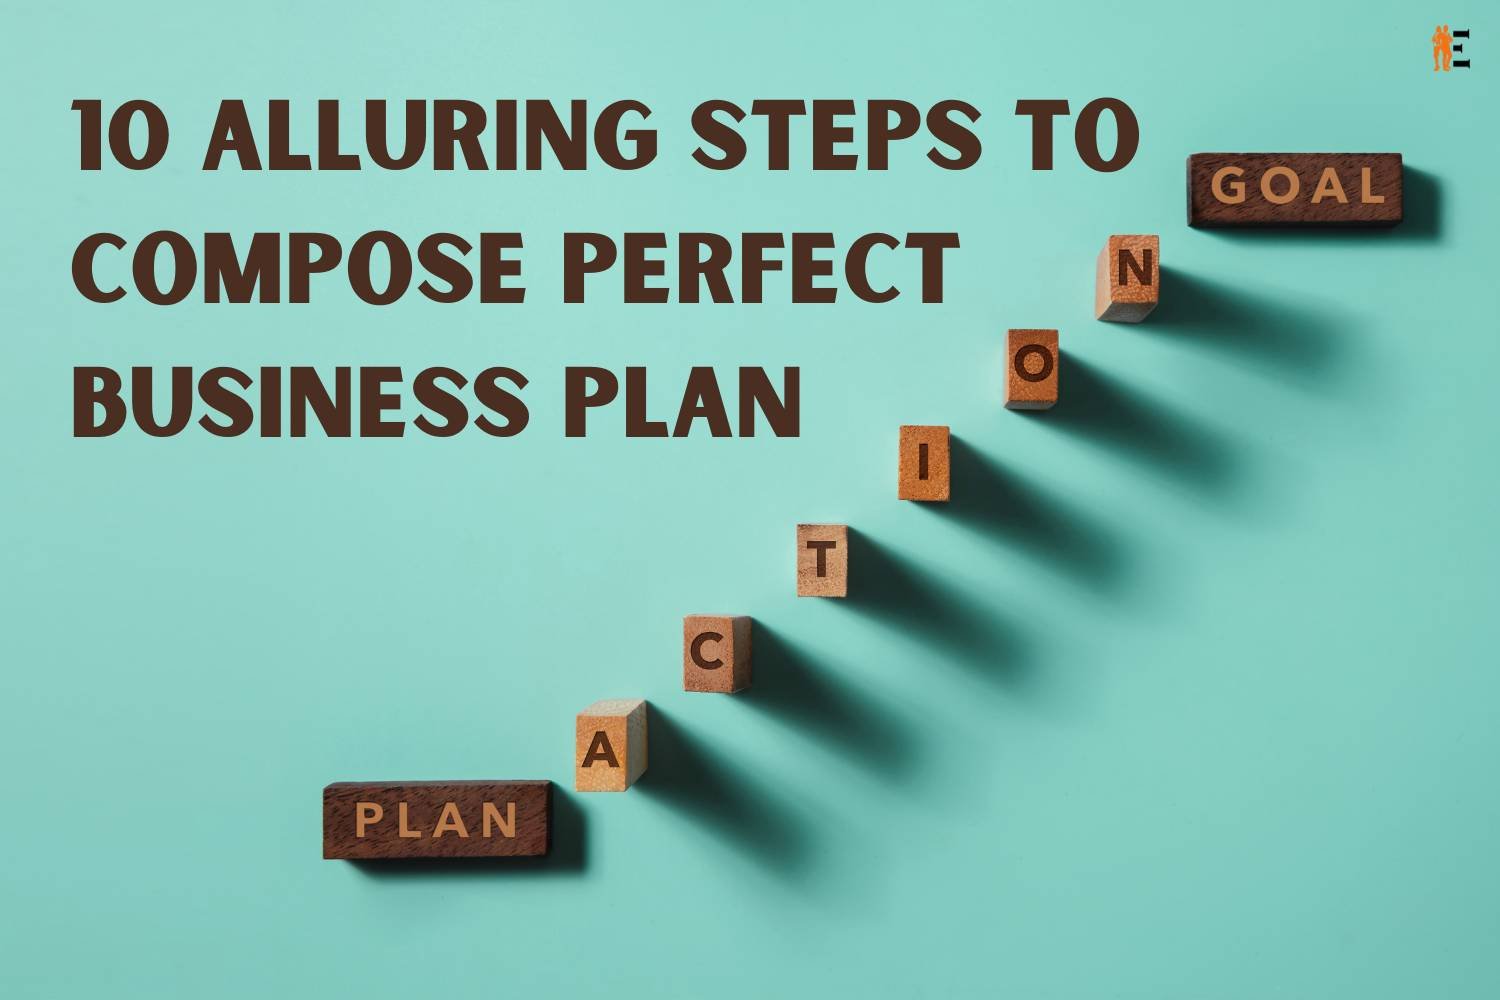 10 Alluring Steps to Compose Perfect Business Plan